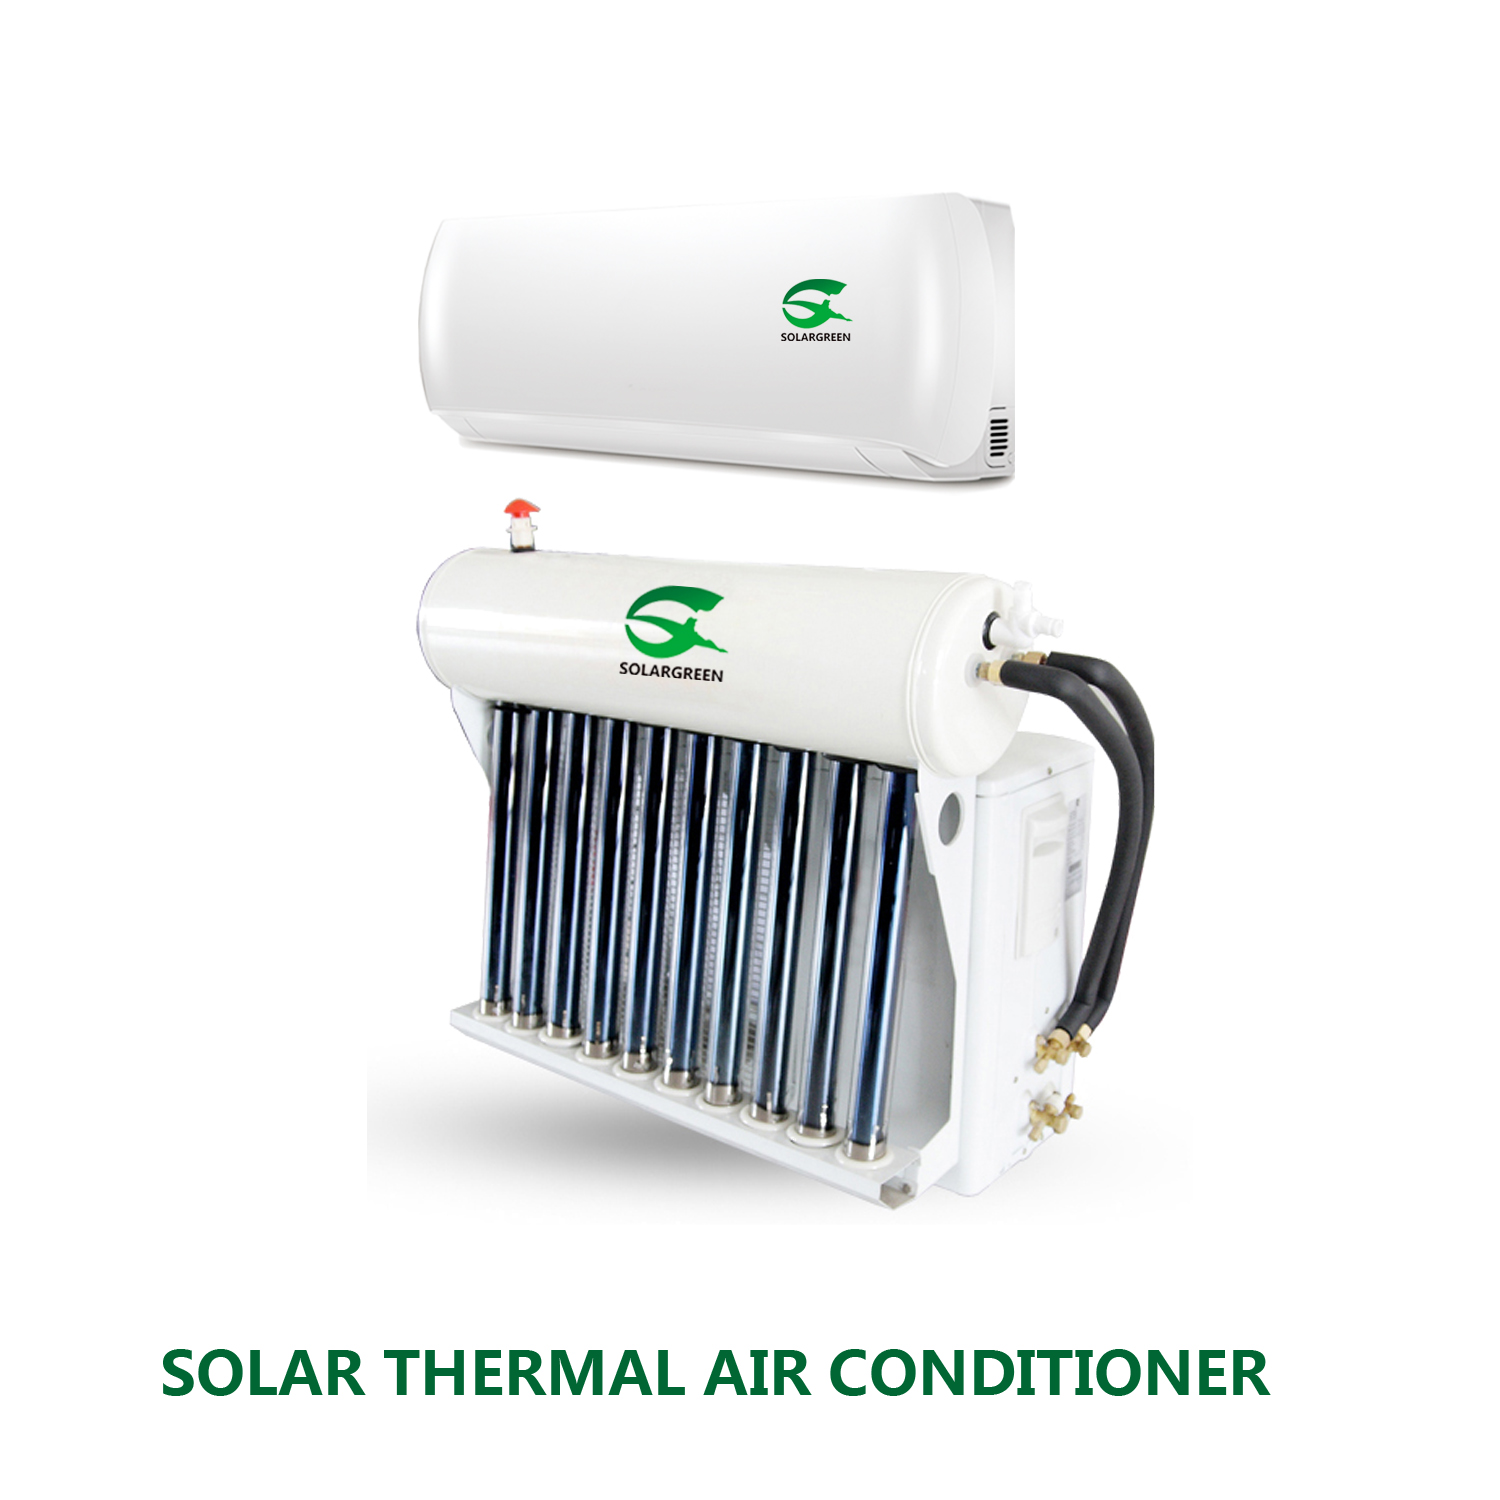 Hybrid Solar thermal Air Conditioner with Vacuum Tubes Saving 30%-50%